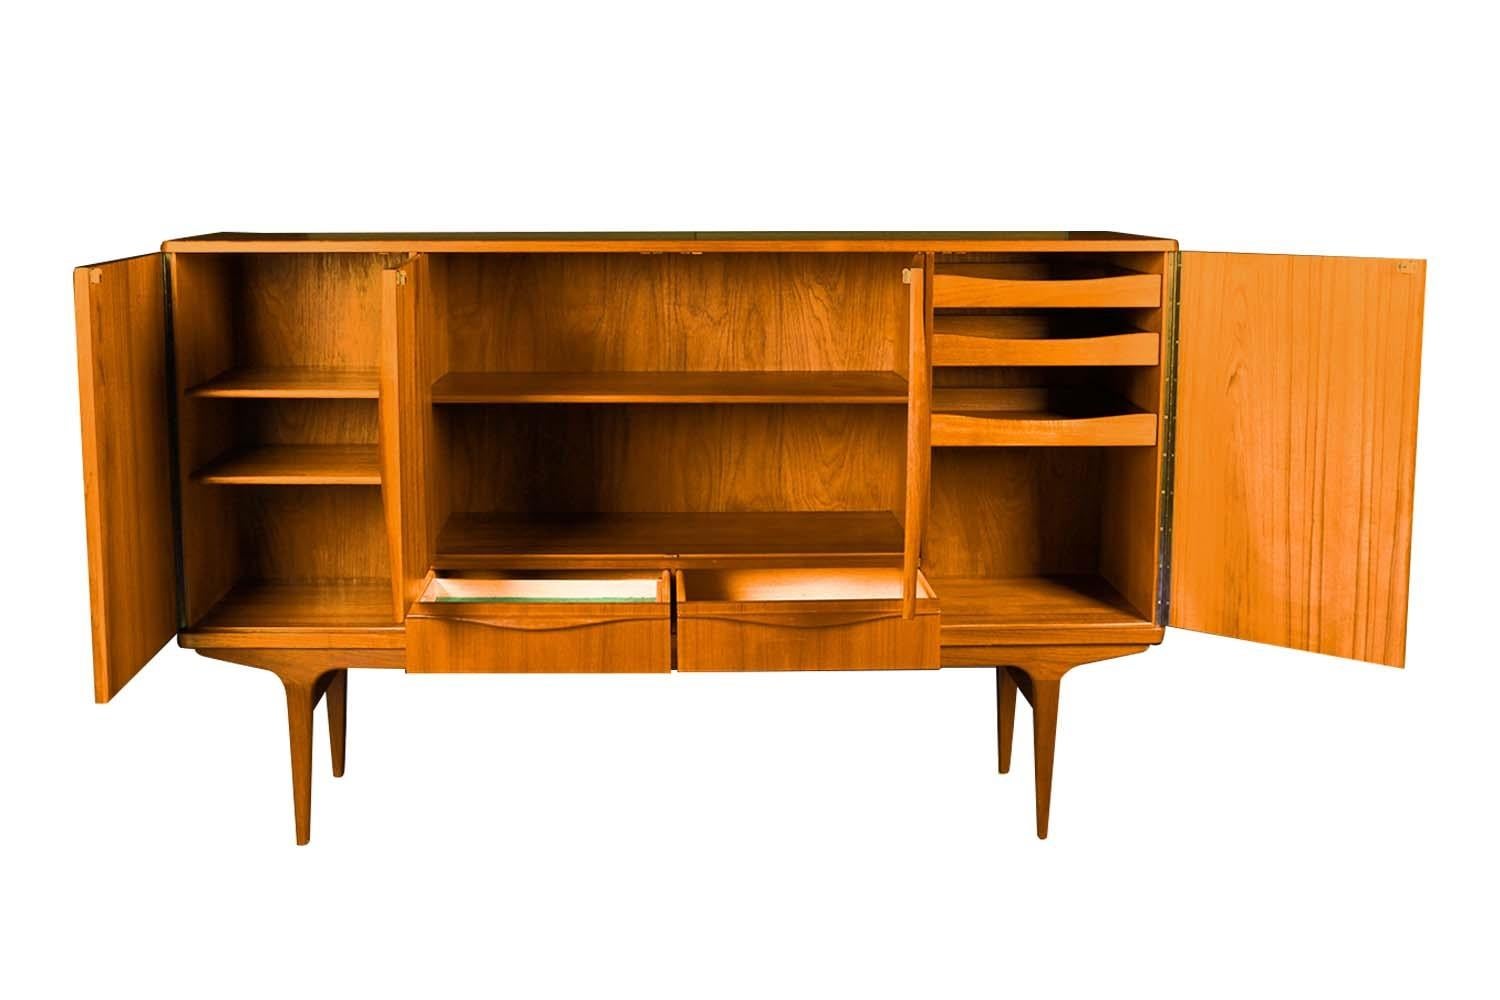 Exceptional Mid Century extra tall teak highboard sideboard/ server made in Denmark, by LYBY Mobler circa 1960’s. Beautifully teak grained, extra tall sideboard. Features finished teak interior with spacious storage in the center flanked by cabinet